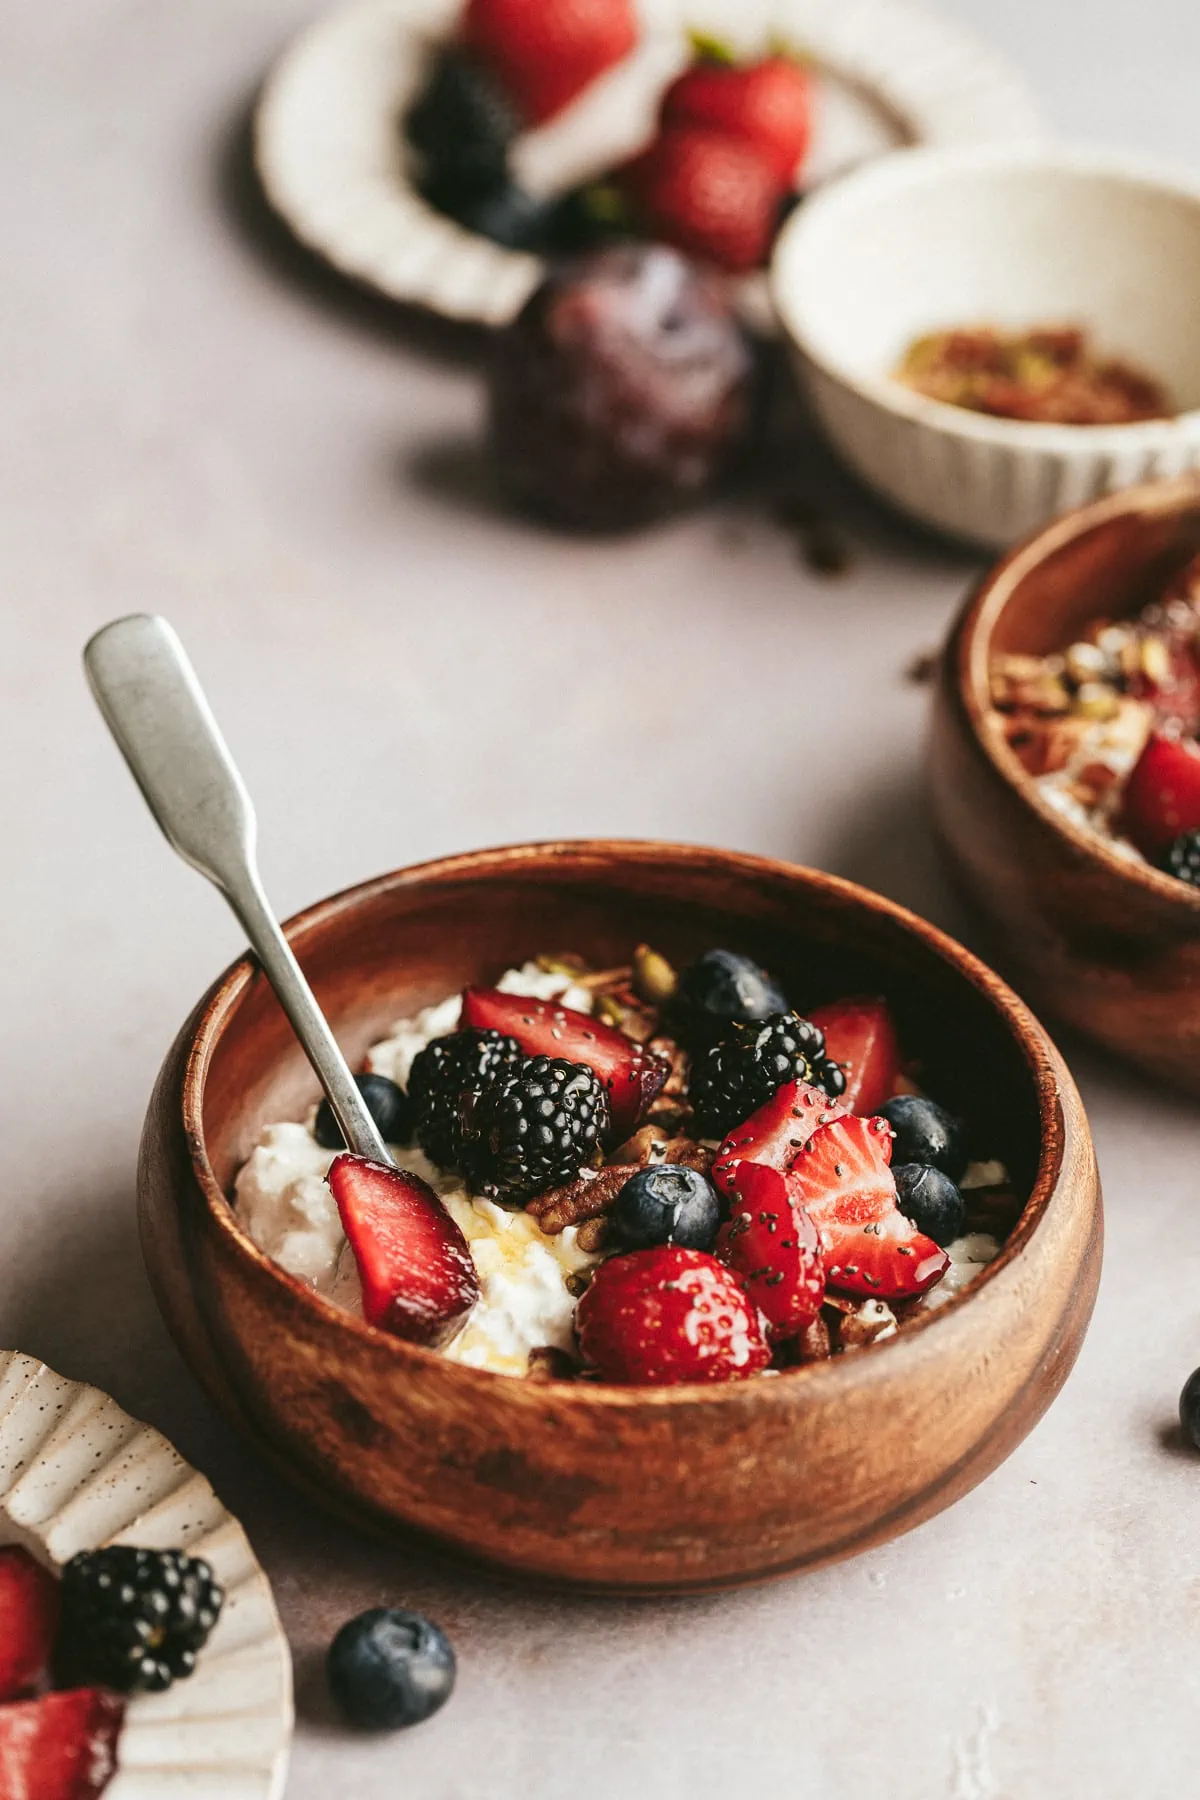 A wooden bowl with a serving of cottage cheese with fruit.